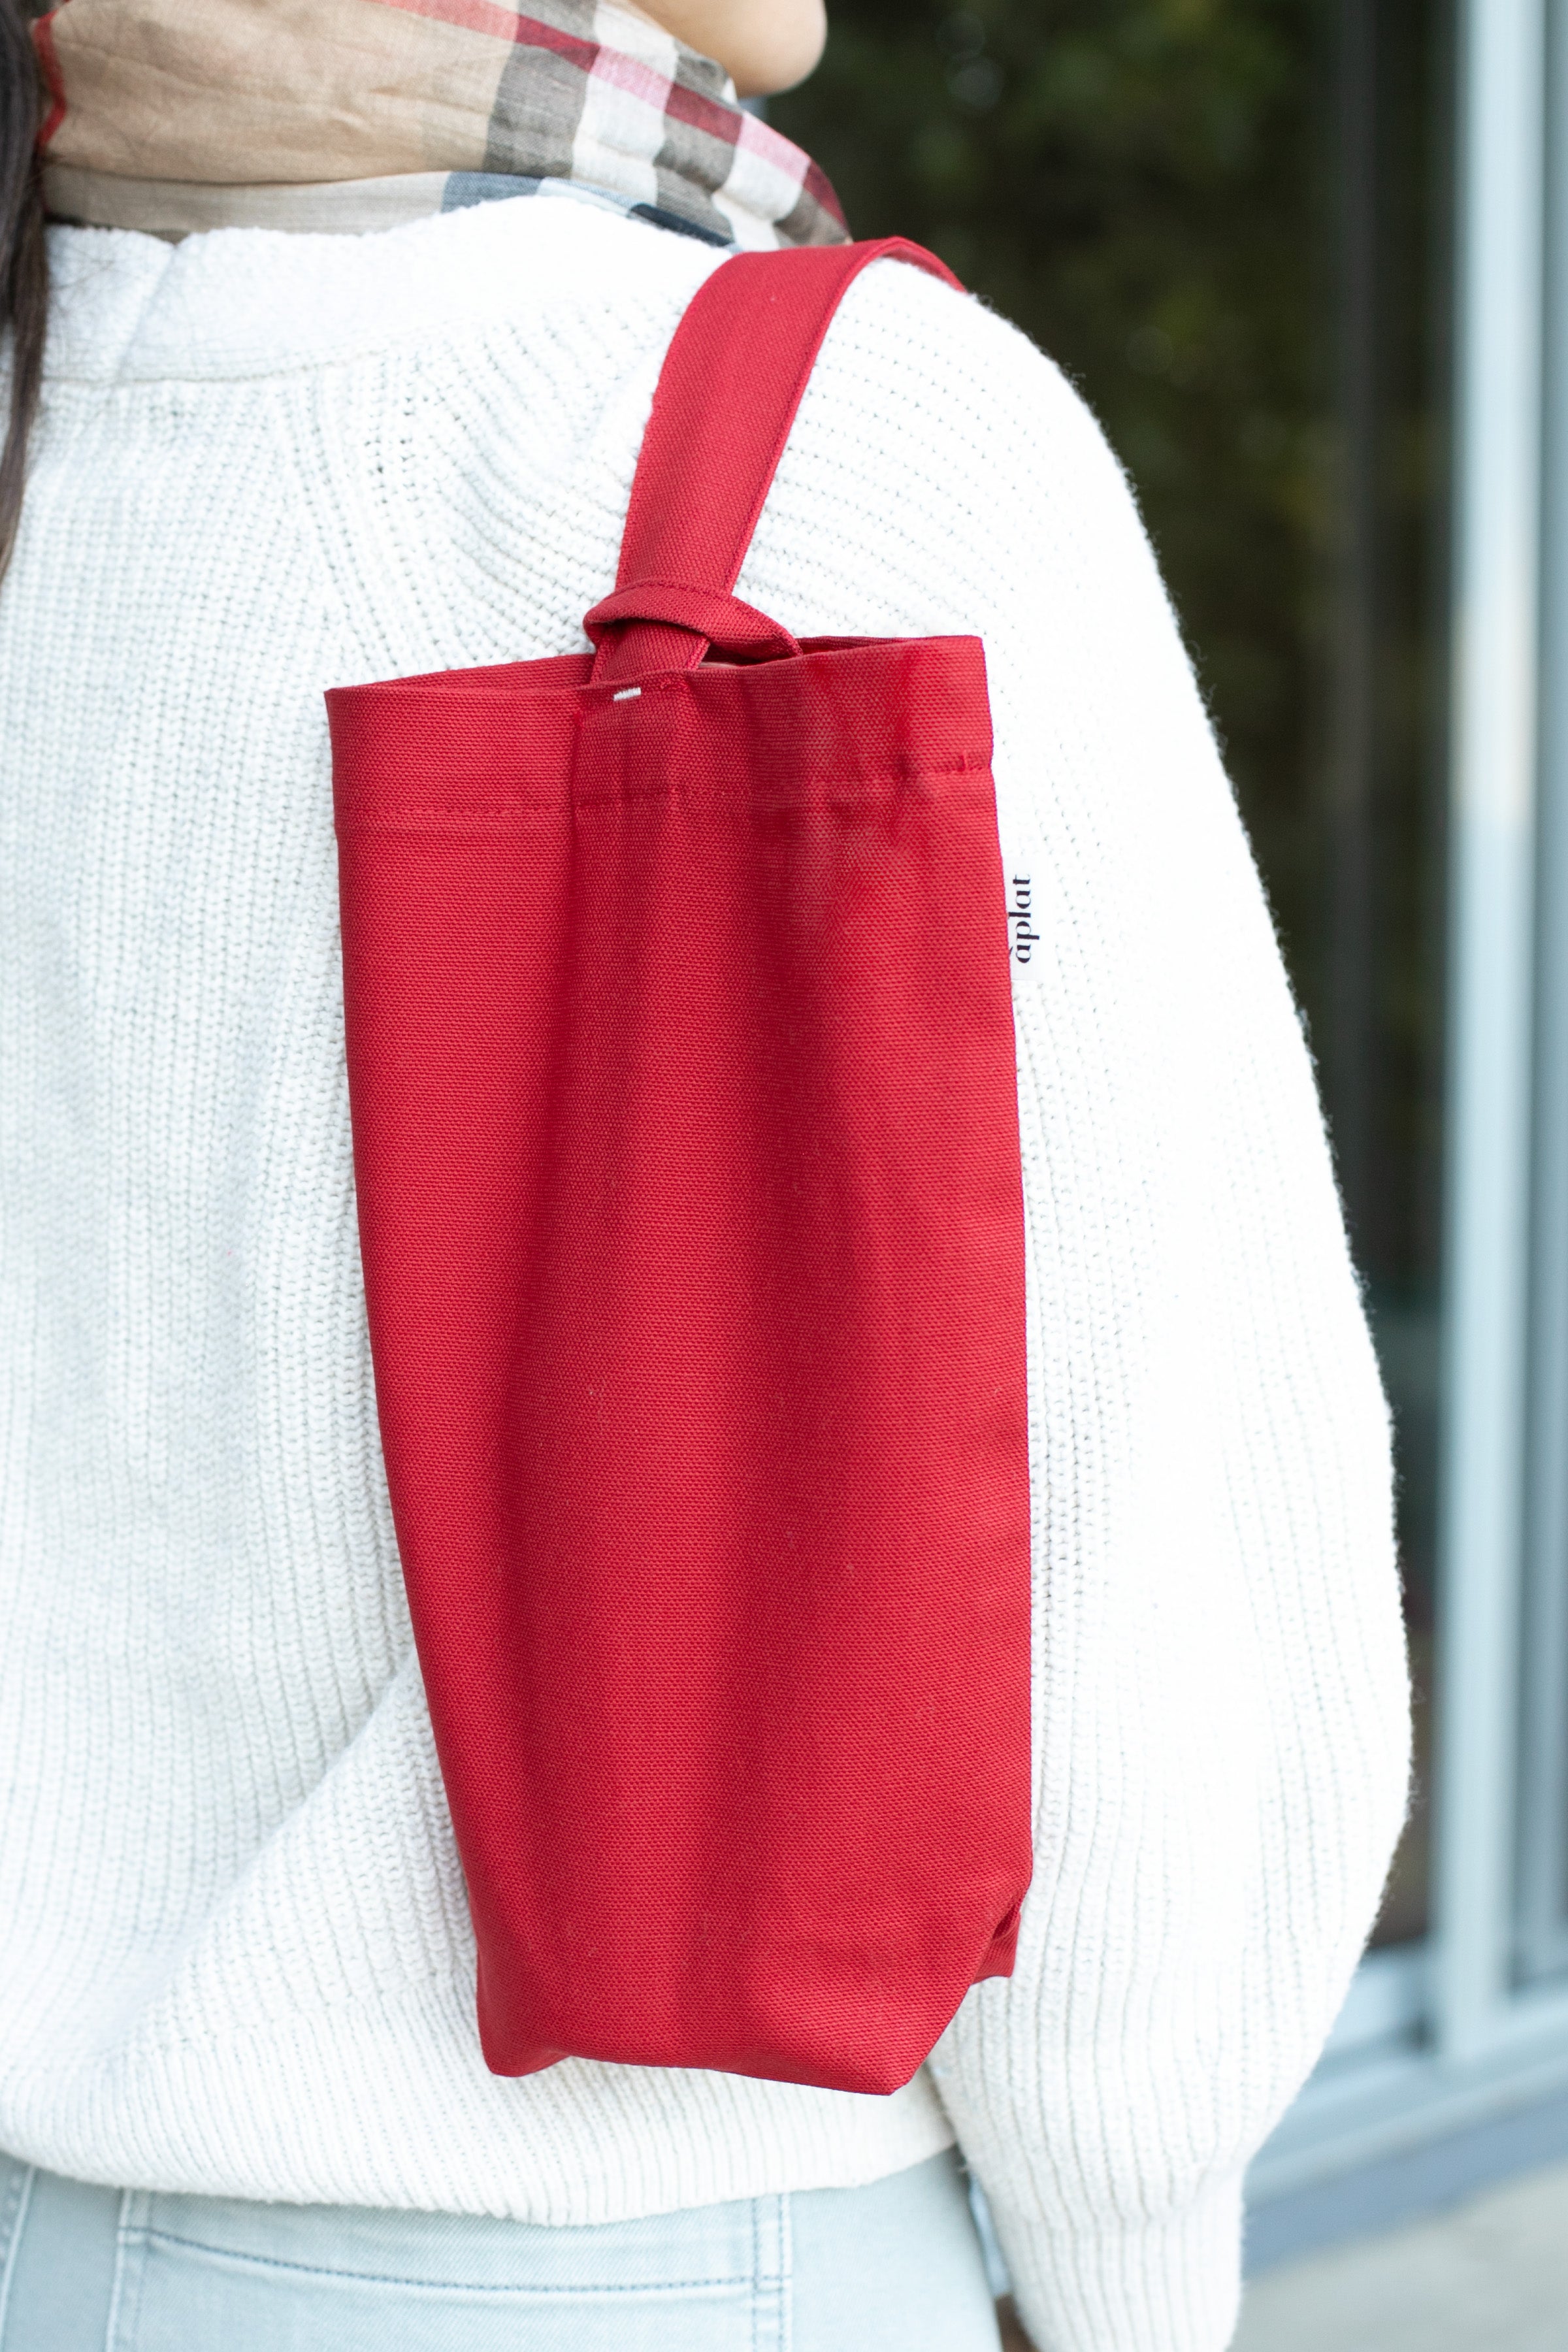 Aplat Reusable Cotton & Denim Carriers and Totes for Wine and Spirits